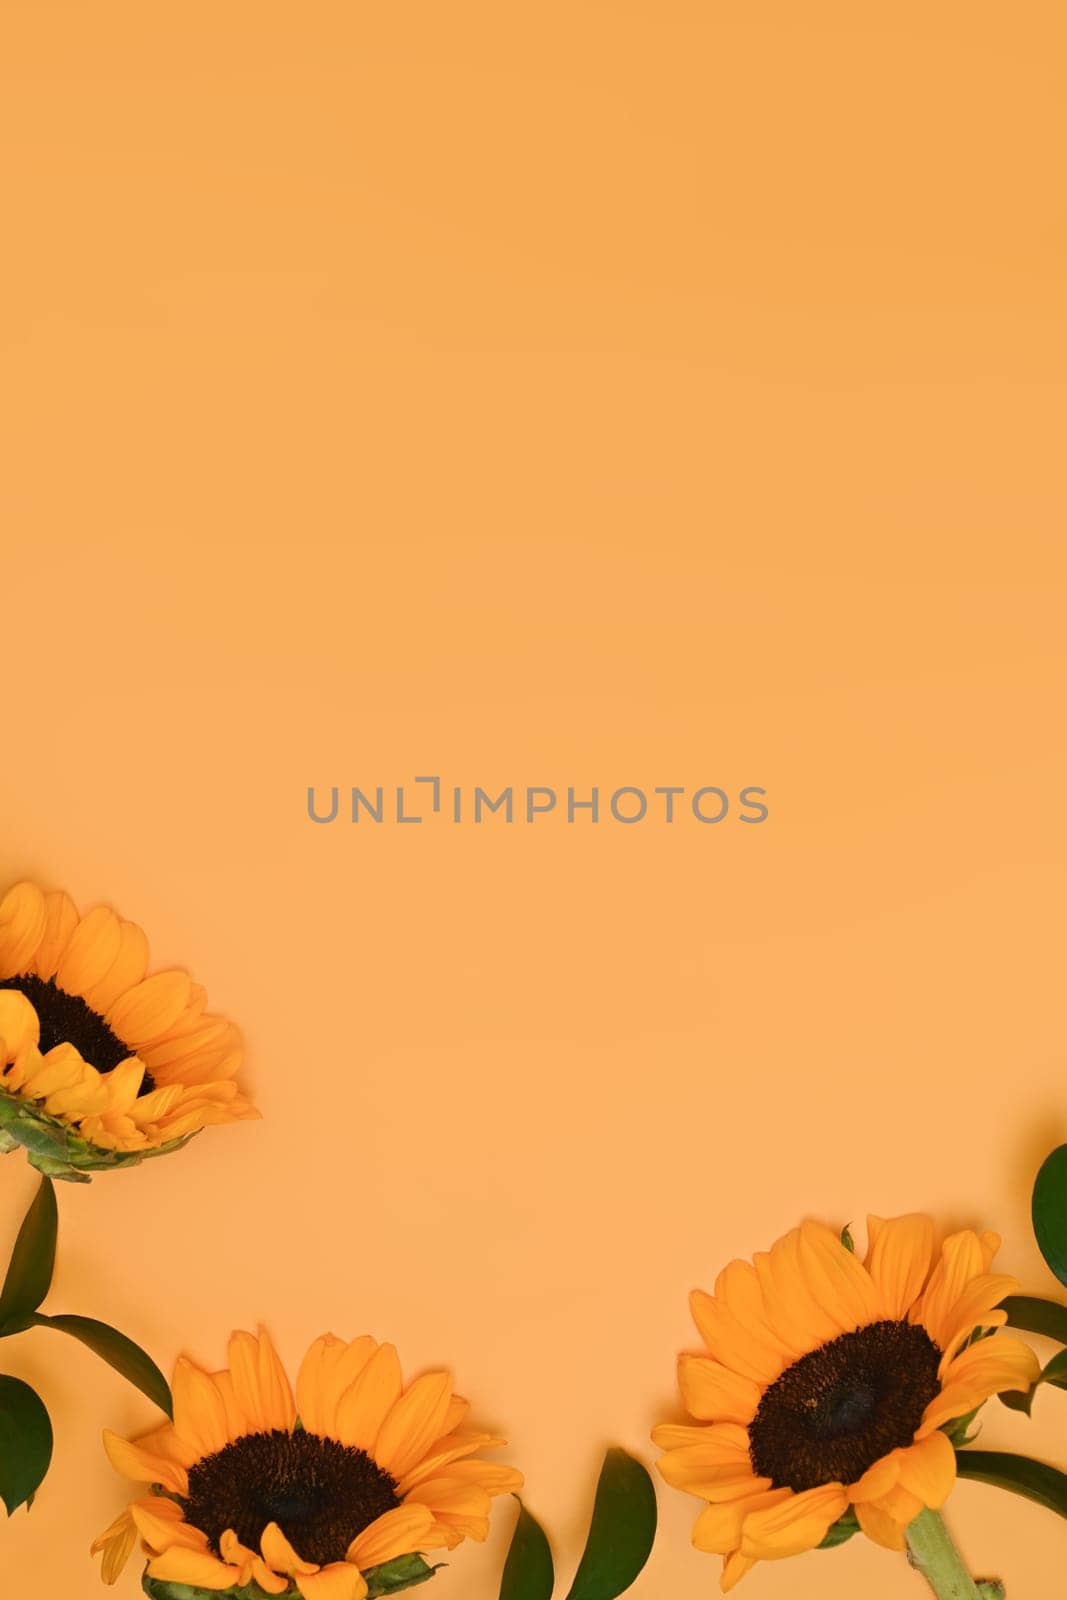 Sunflowers with green leaves on yellow background with copy space. Natural background, autumn or summer concept by prathanchorruangsak